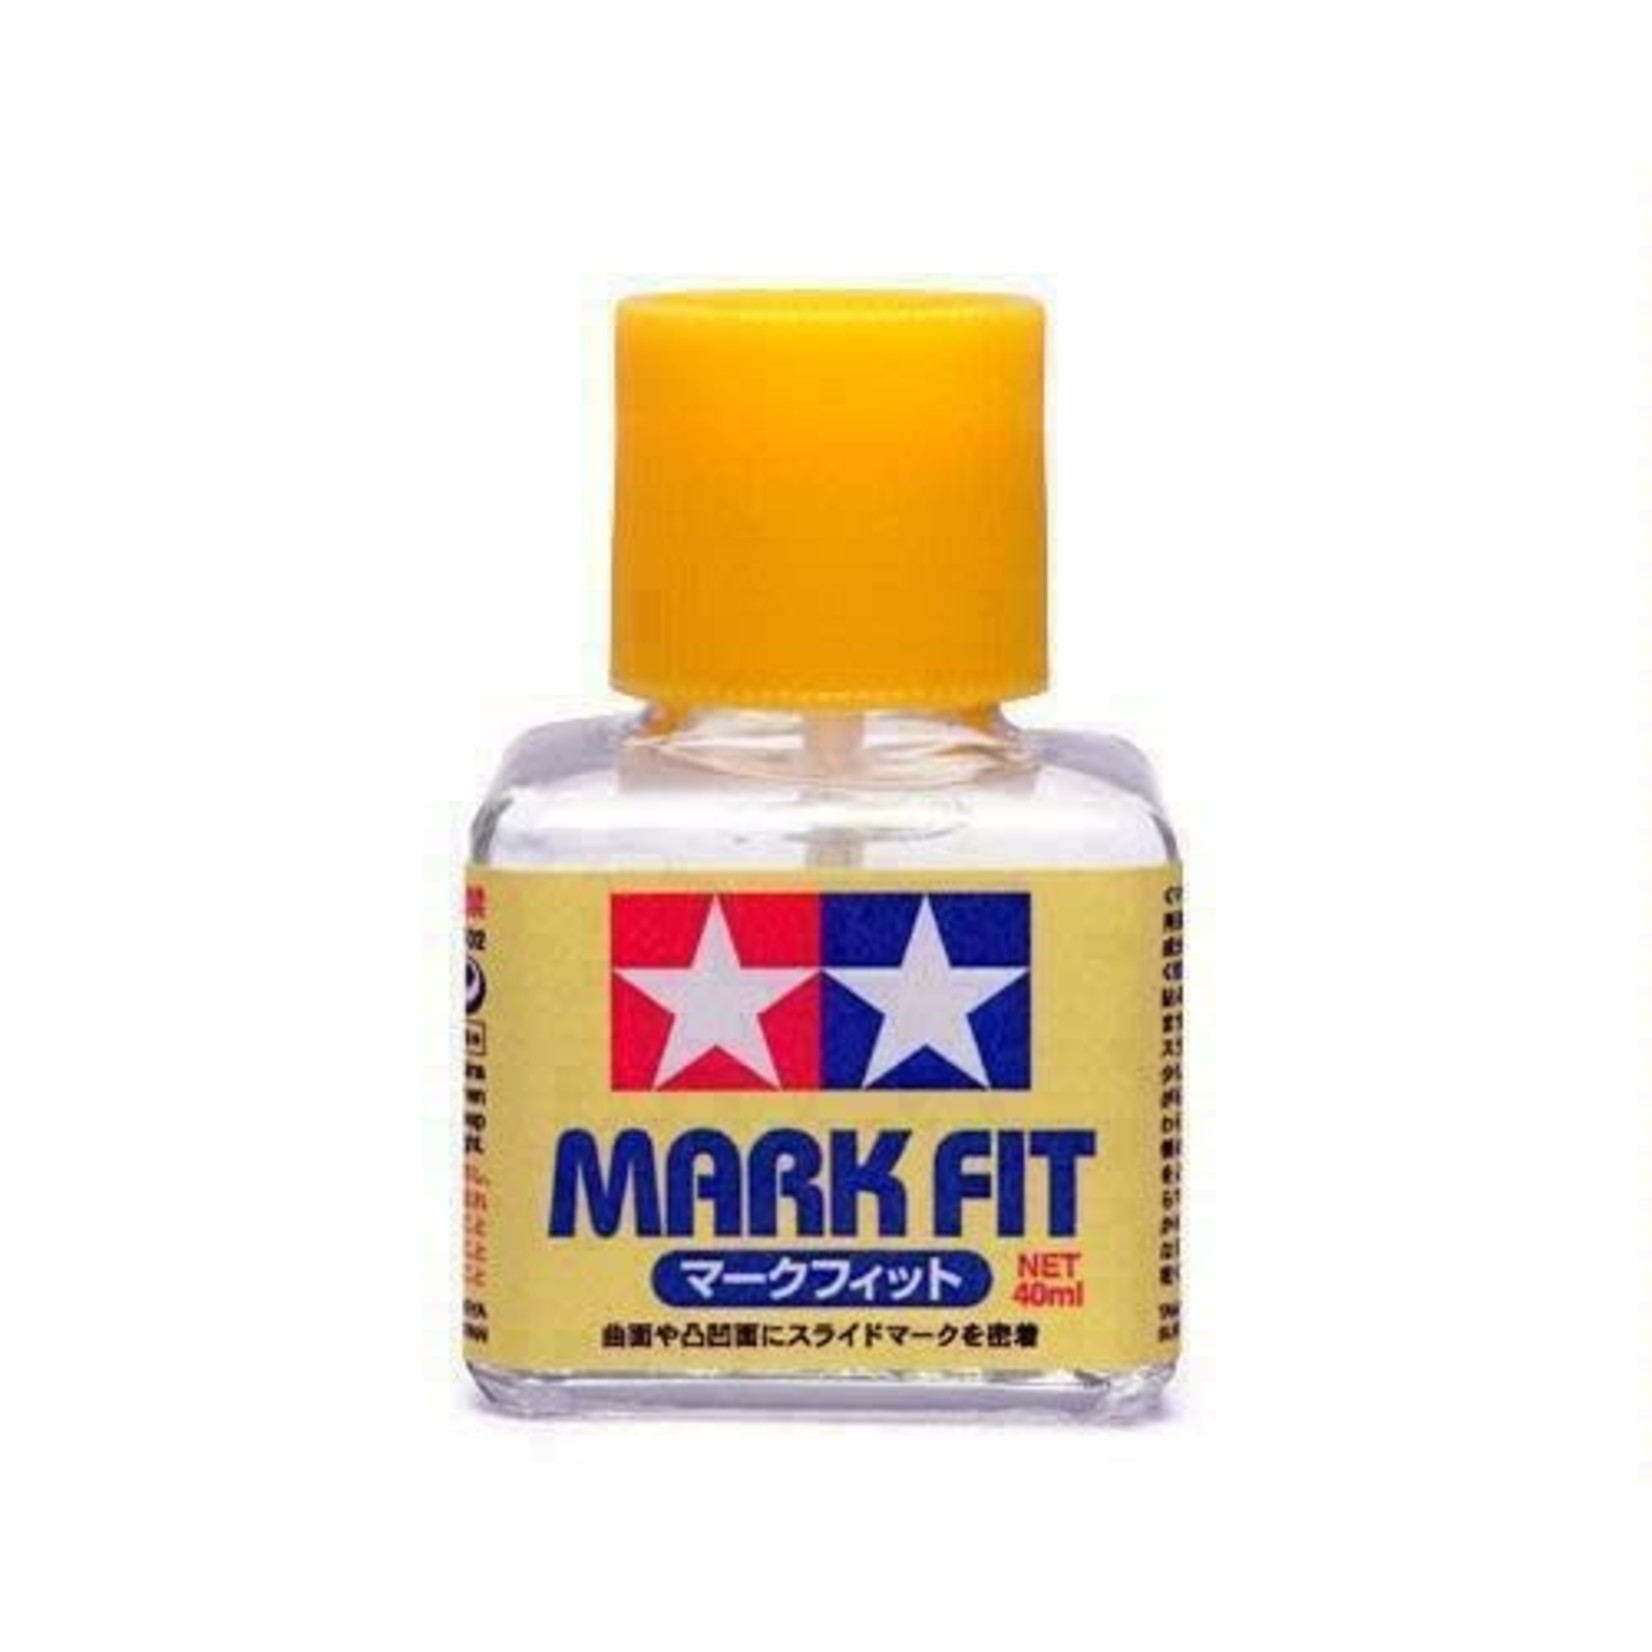 Tamiya Mark Fit Decal Solvent